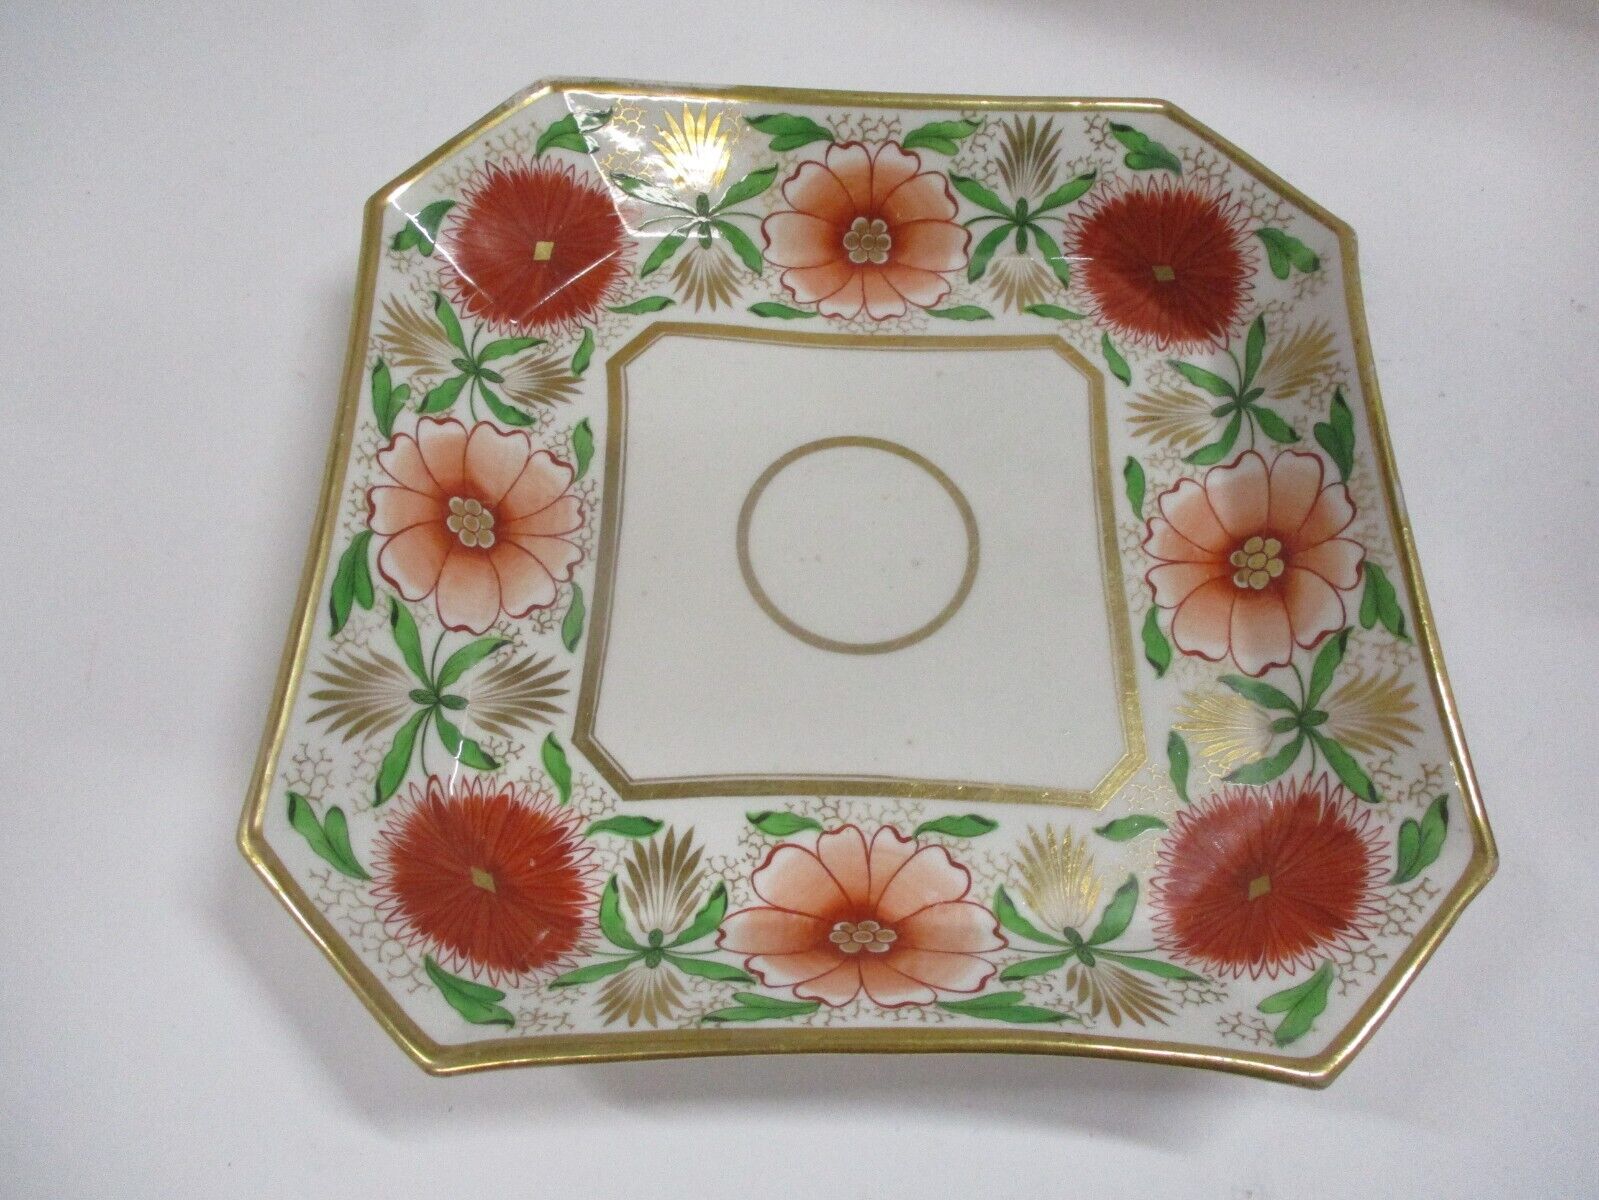 Antique C. 1815 Spode Square with Orange Flowers Plate